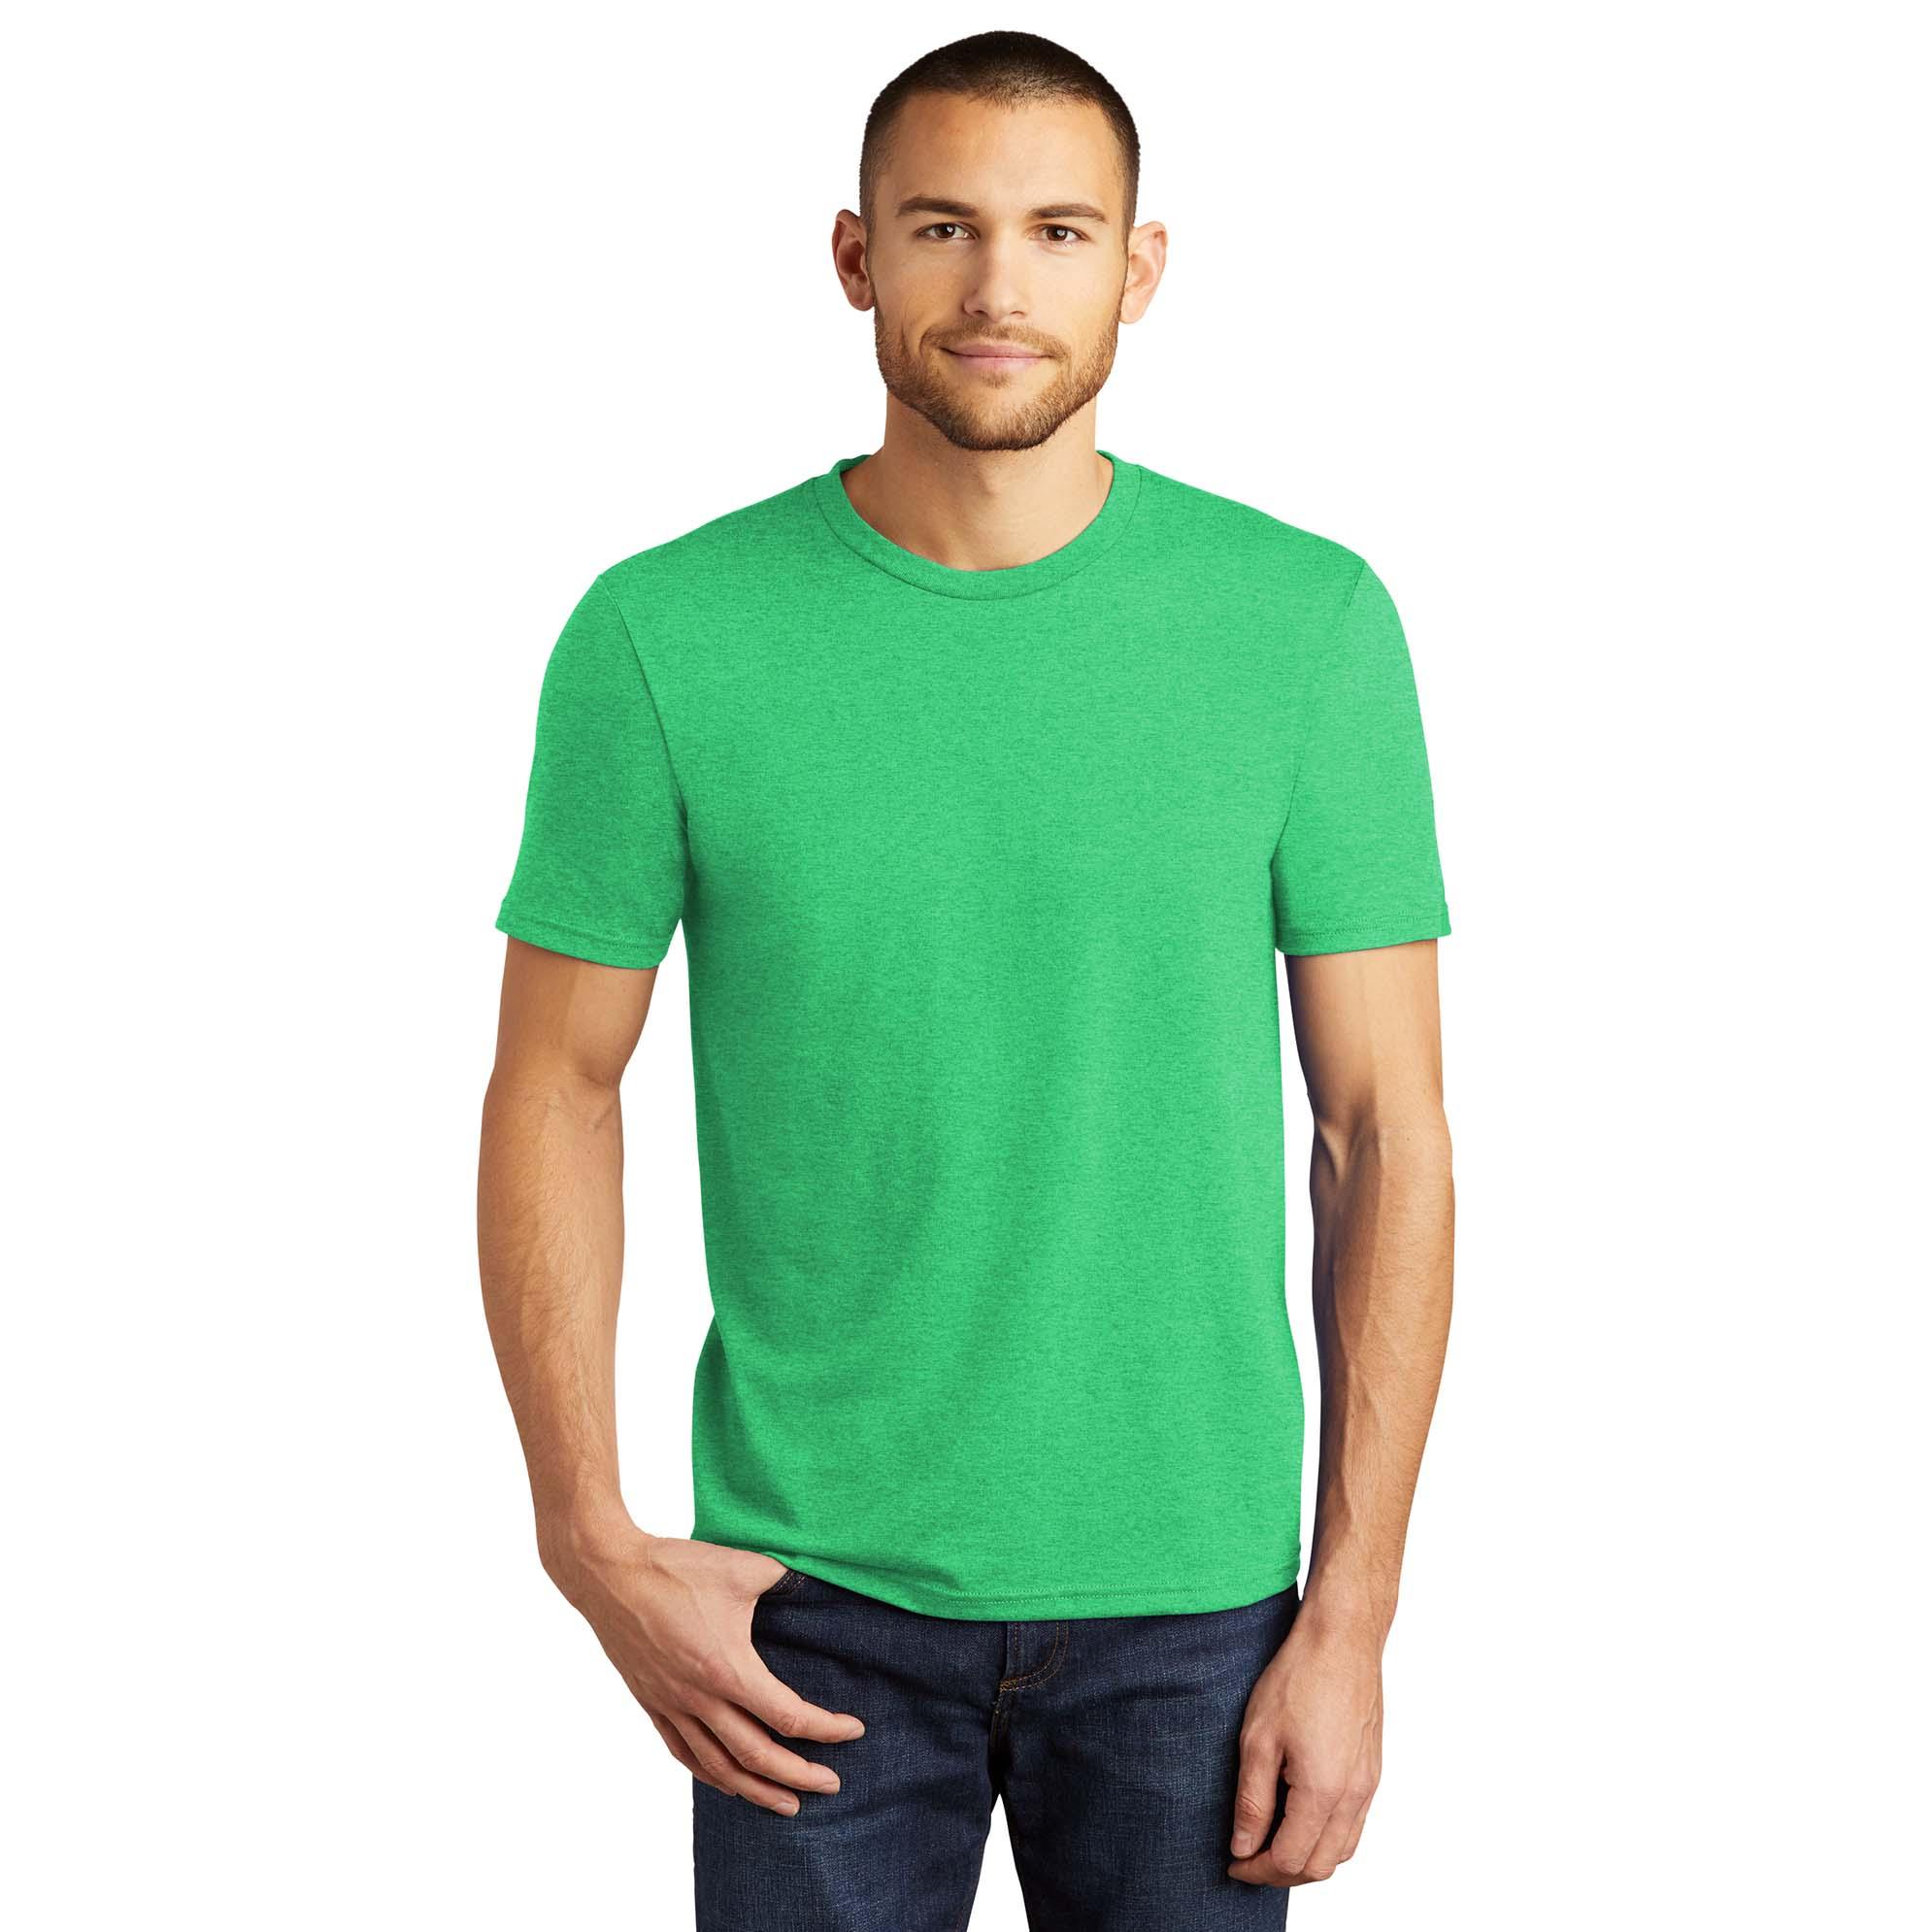 District DM130 Perfect Tri Crew Tee - Green Frost | FullSource.com